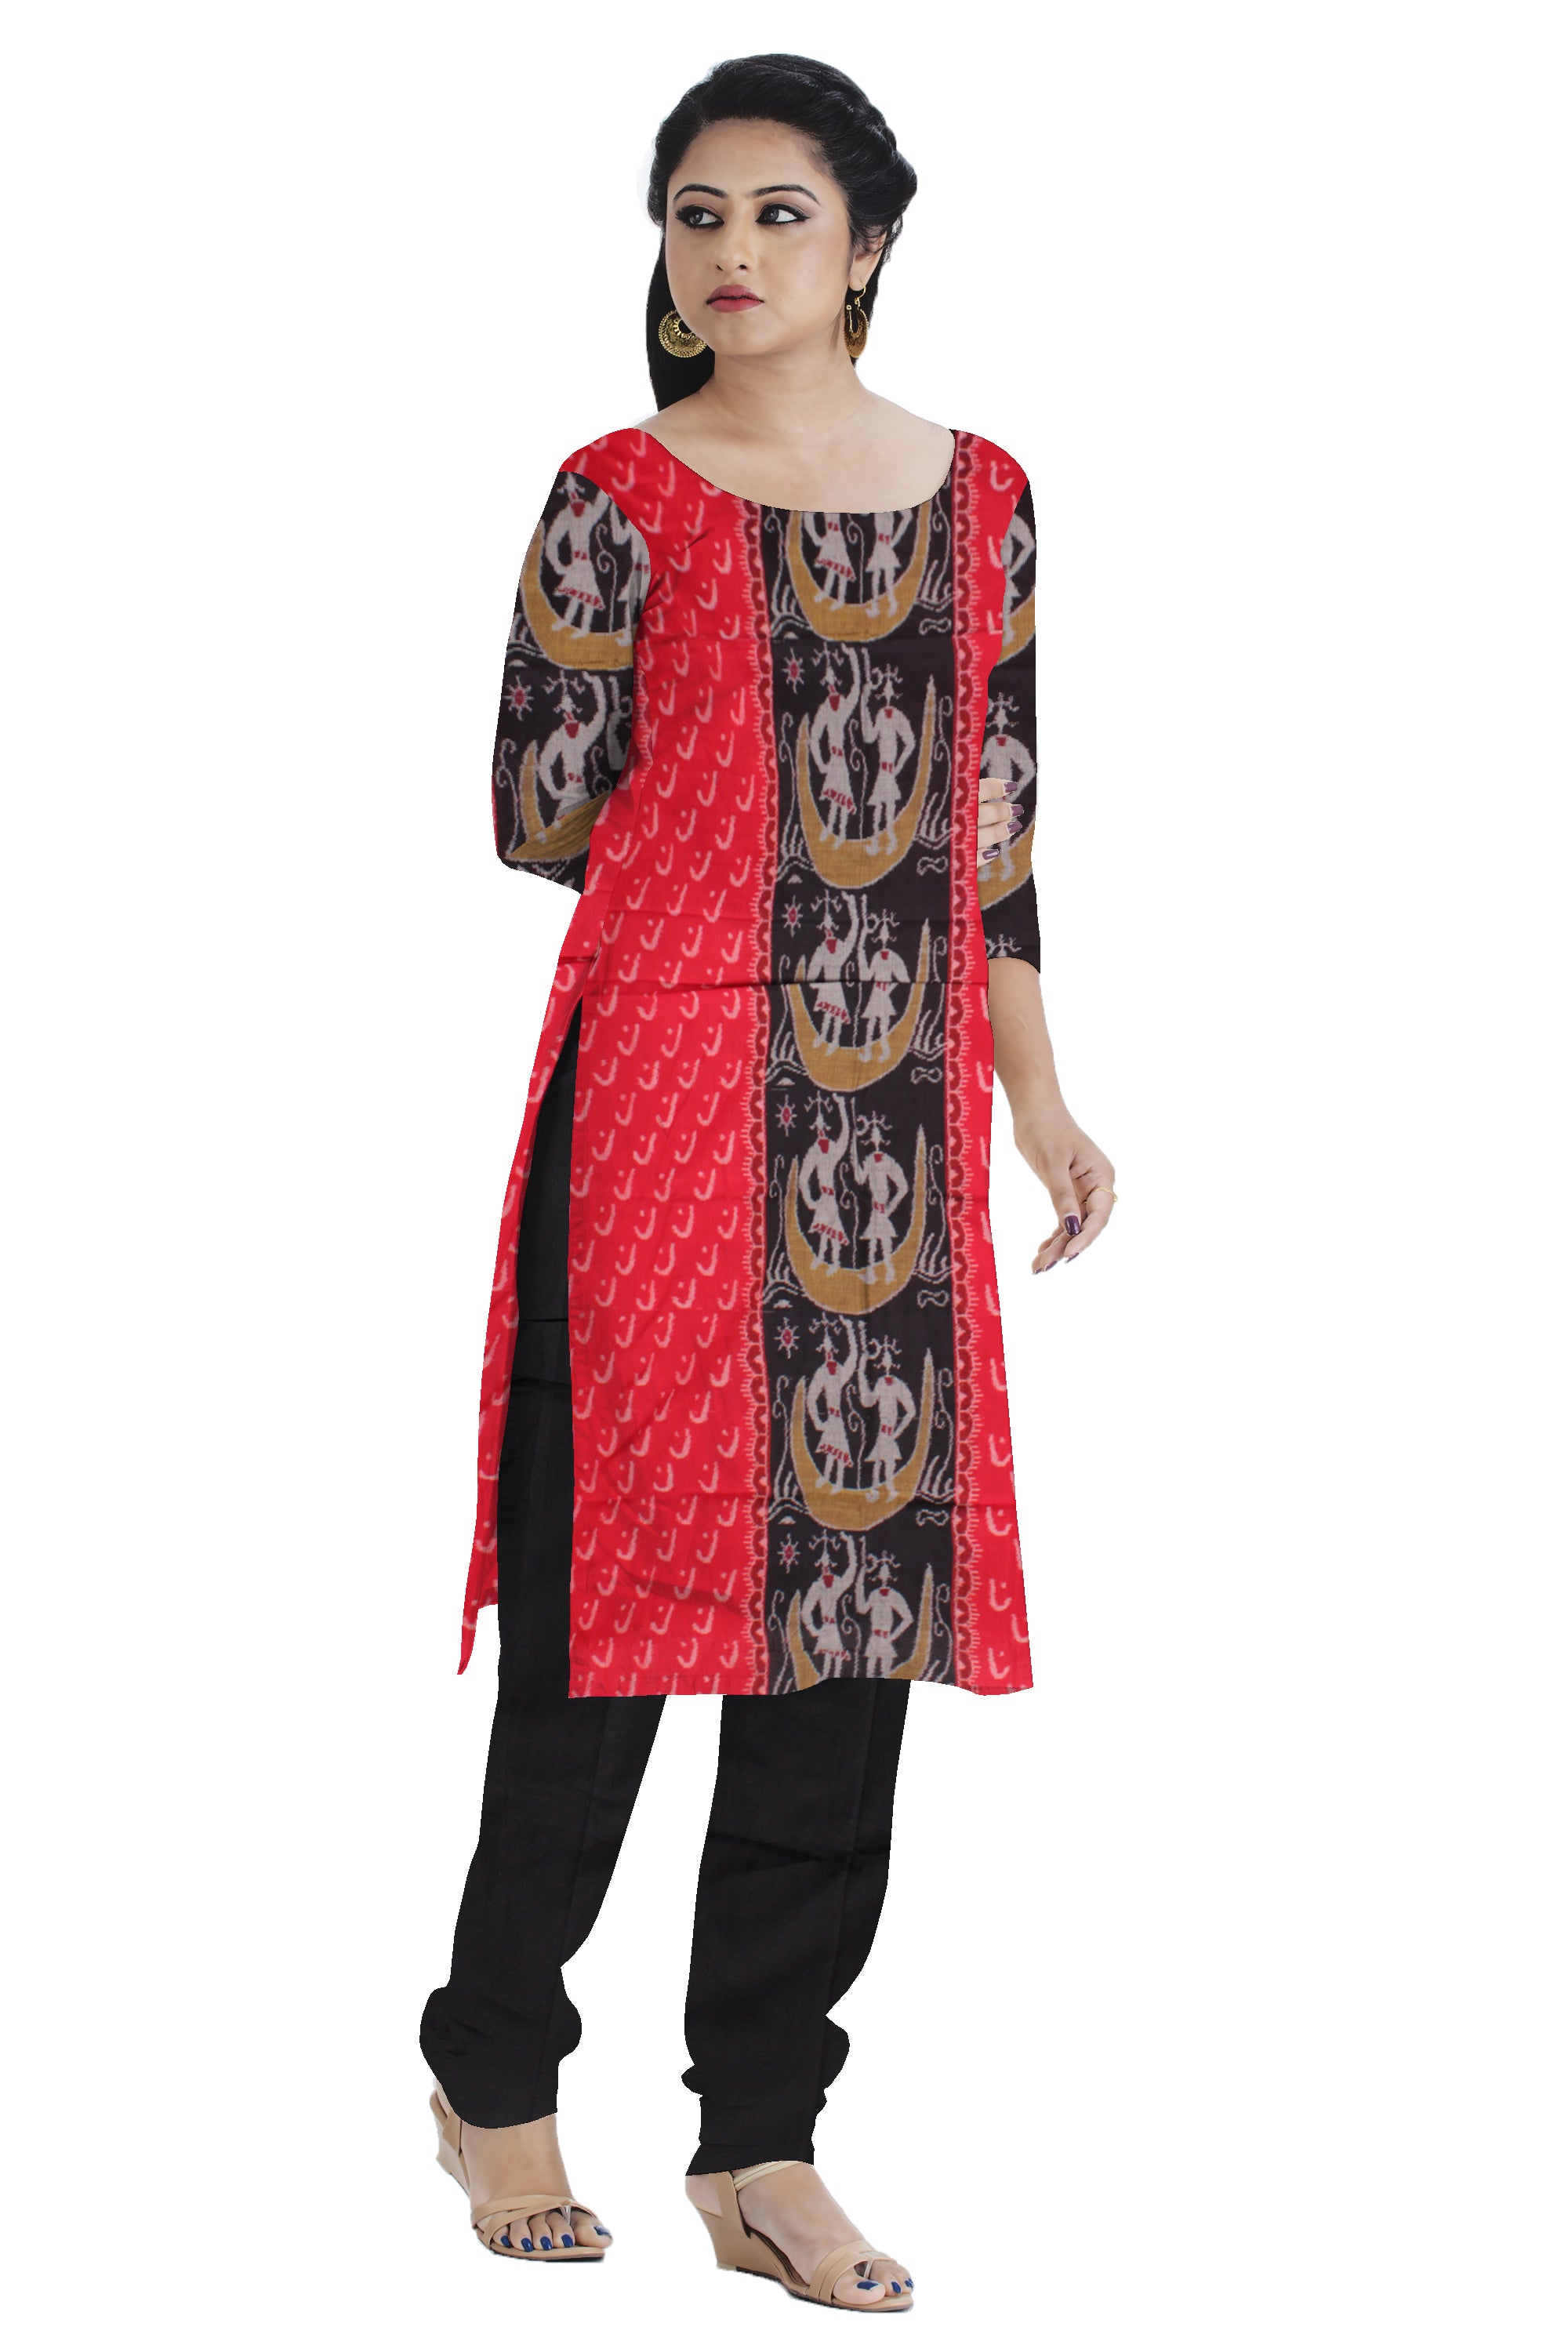 Beautiful cotton dress material in White, Red and Black color with terracotta  design. Red Dupatta  UNSTITCHED DRESS SET - Koshali Arts & Crafts Enterprise